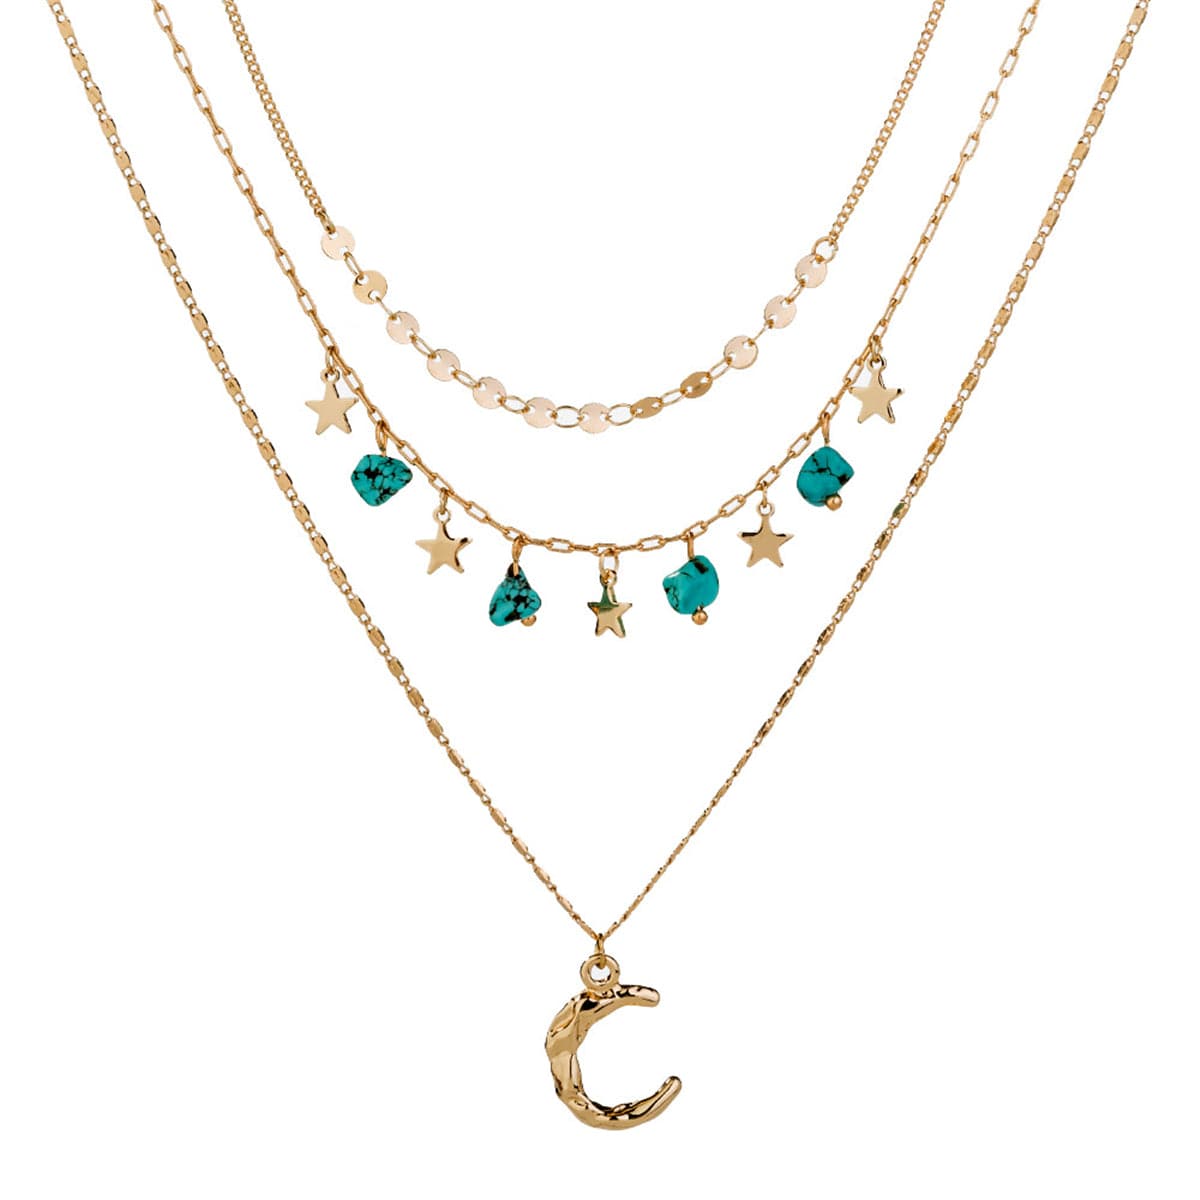 Turquoise & 18K Gold-Plated Layered Celestial Necklace